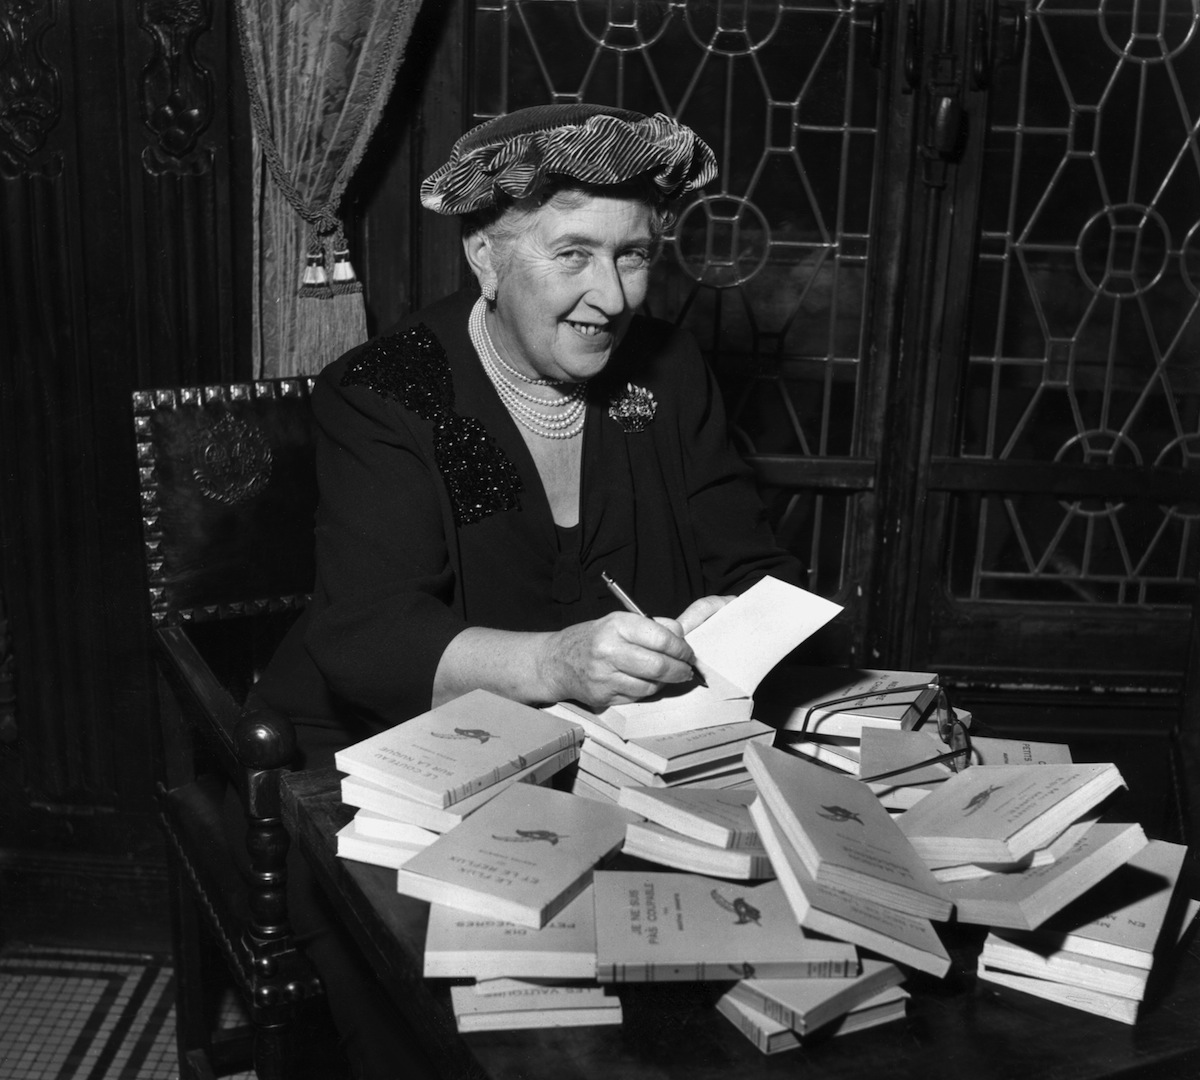 mystery author Agatha Christie (1890-1976) autographing French editions of her books in 1965 (Hulton Archive / Getty Images)